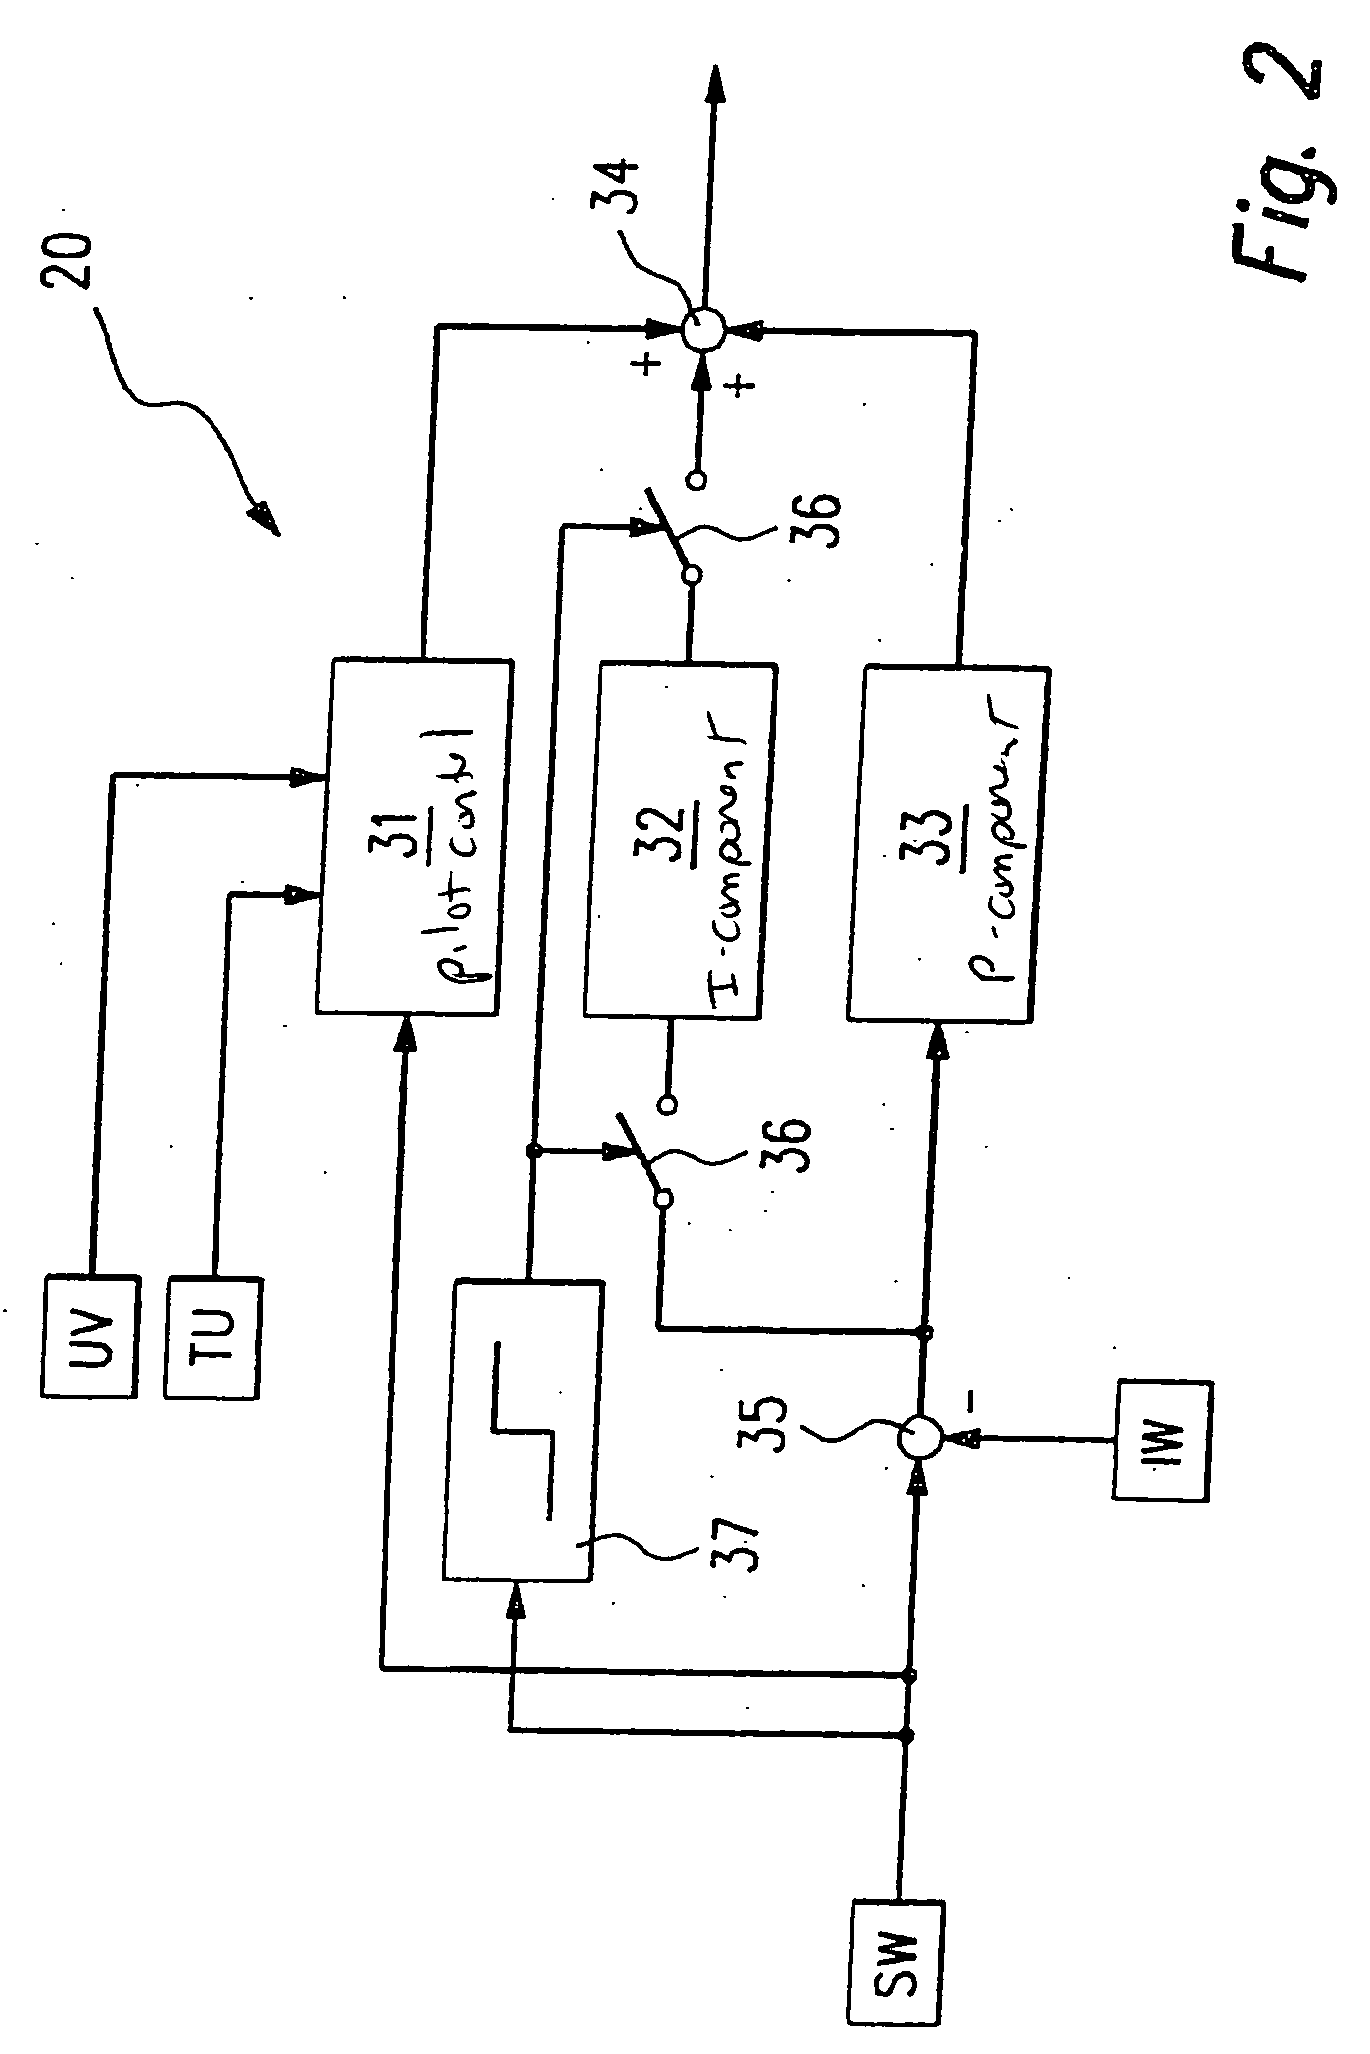 Method for regulating the current flowing through an electromagnetic actuator